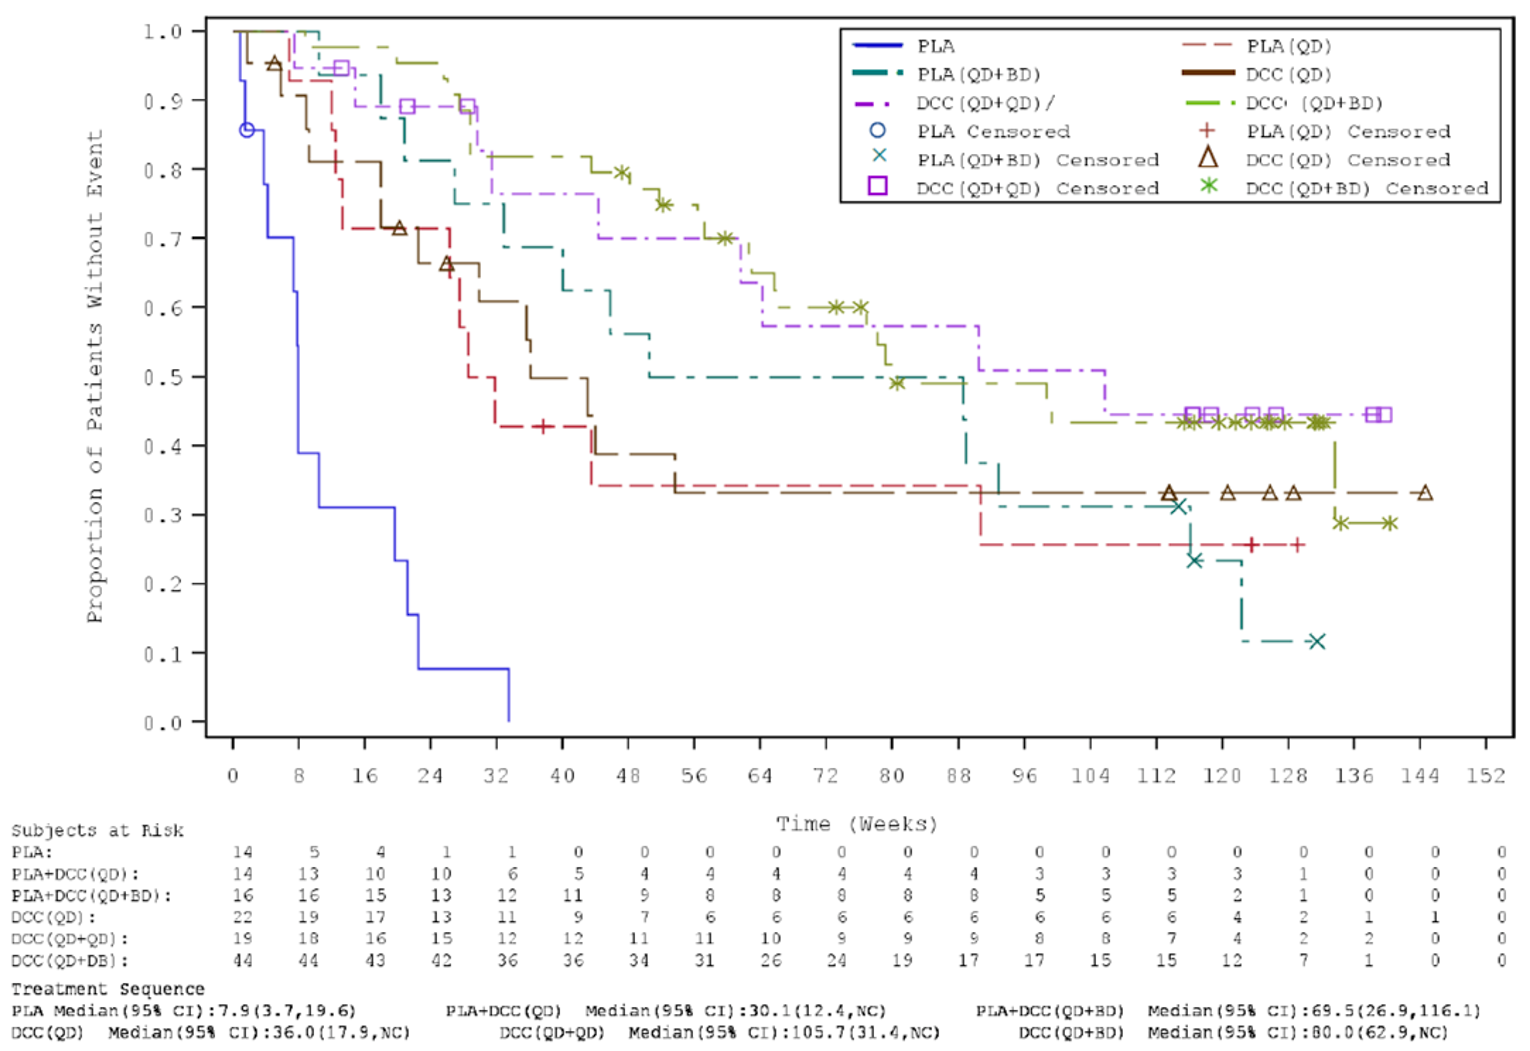 This Kaplan-Meier analysis of OS among the ITT population of the INVICTUS trial as of the January 15, 2021 database lock shows OS probabilities for the following 6 subgroups of patients: (i) patients randomized to placebo during the DB period who did cross over, (ii) patients randomized to placebo during the DB period who crossed over to OL ripretinib 150 mg once daily but did not escalate the dosage; (iii) patients randomized to placebo during the DB period who crossed over to OL ripretinib 150 mg once daily and subsequently dose escalated to 150 mg twice daily; (iv) patients randomized to ripretinib 150 mg once daily during the DB period who did not receive OL treatment; (v) patients randomized to ripretinib 150 mg once daily during the DB period who continued to receive this dose for OL treatment; and (vi) patients randomized to ripretinib 150 mg once daily during the DB period who subsequently dose escalated to 150 mg twice daily for OL treatment.